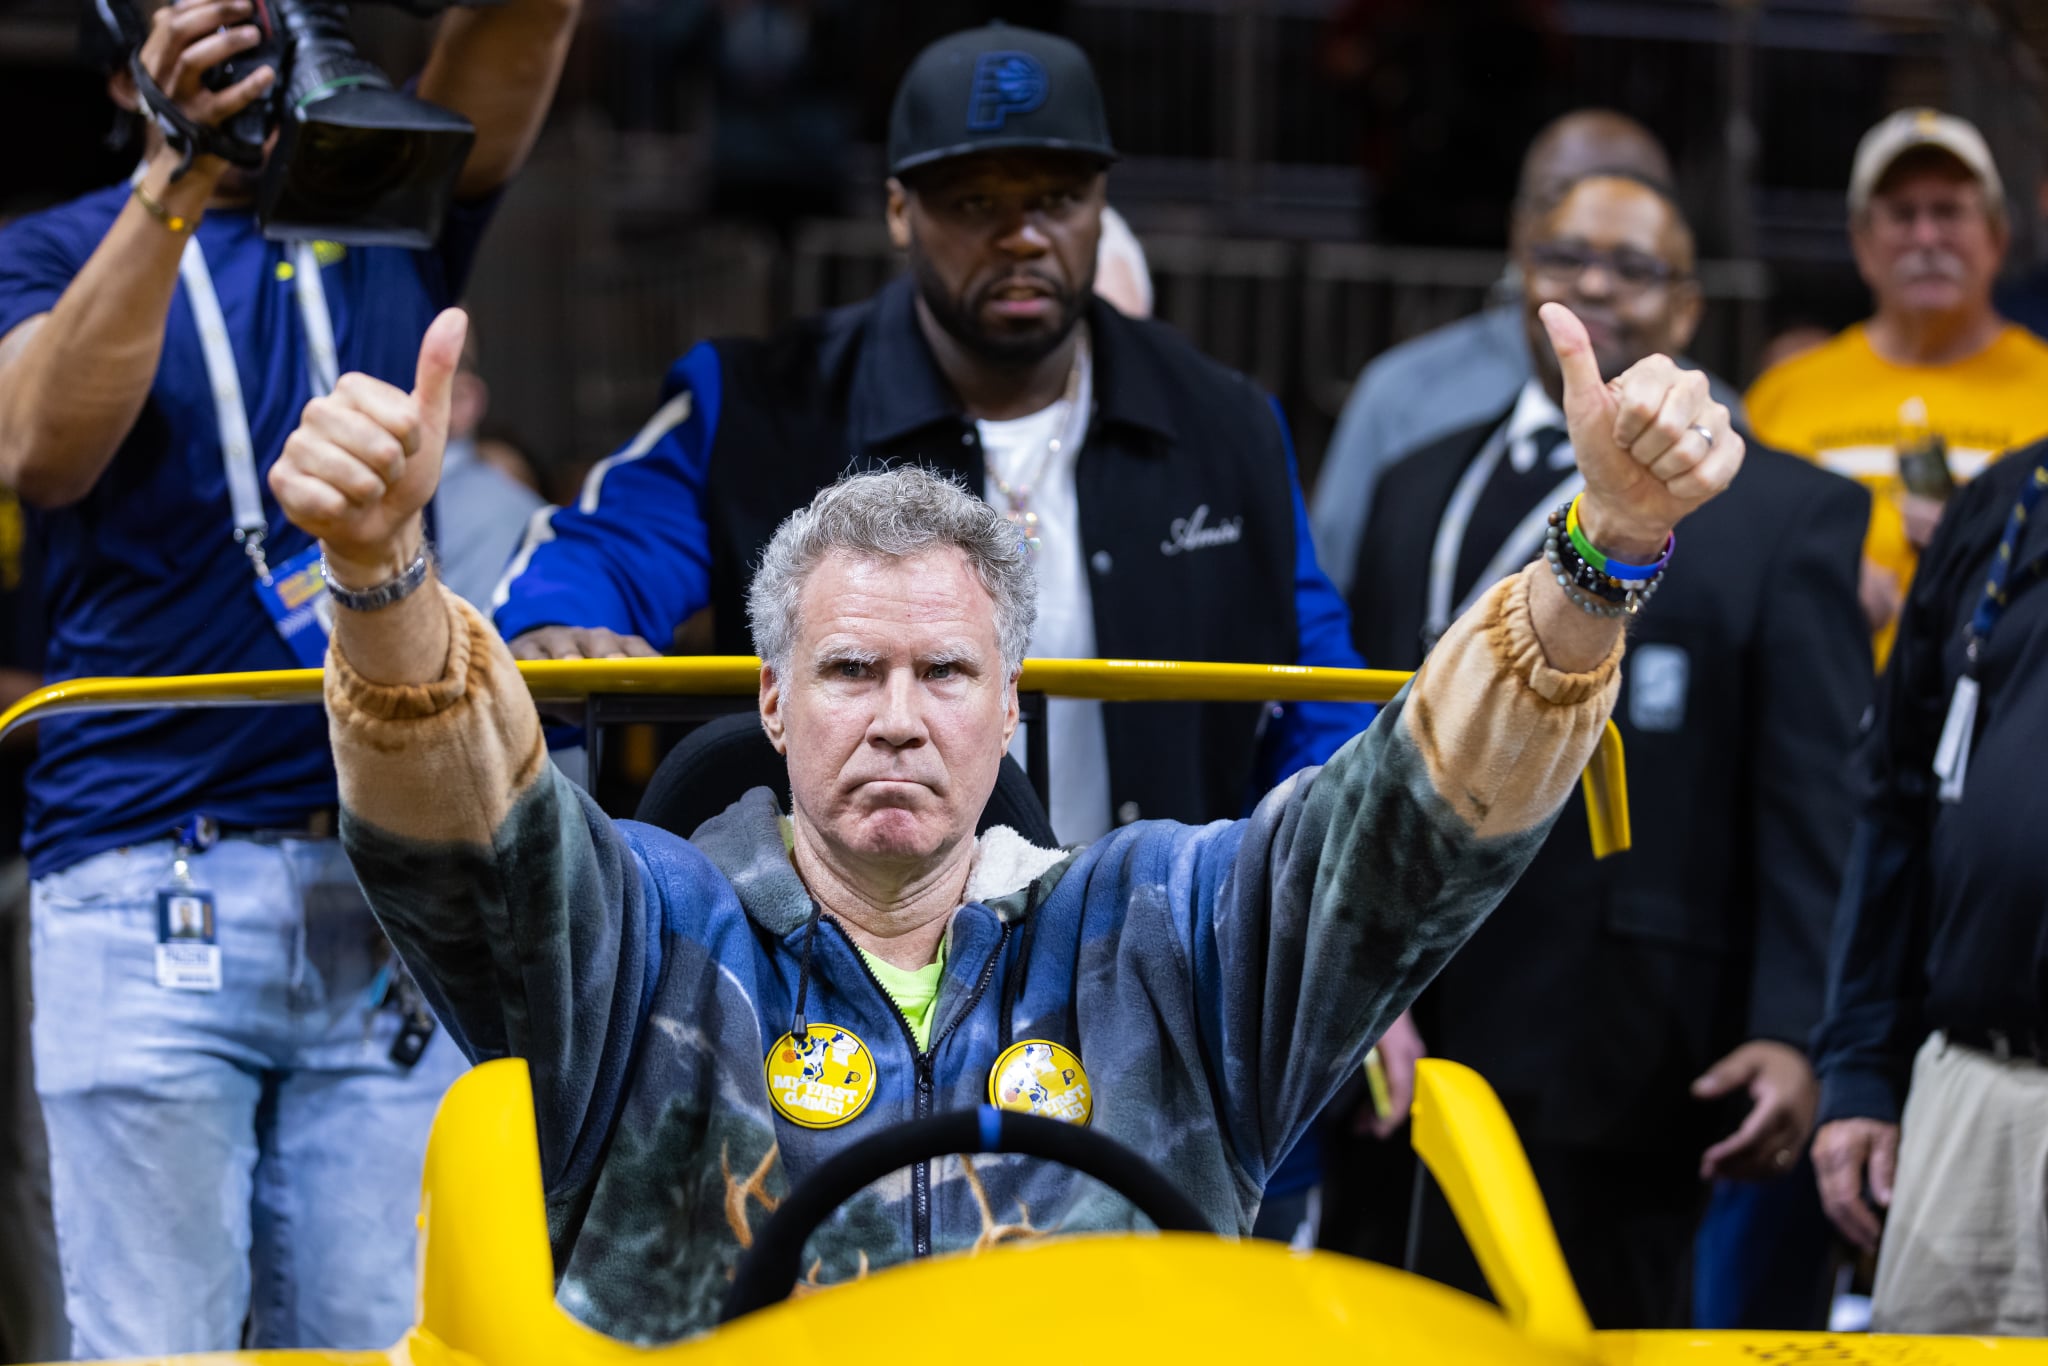 INDIANAPOLIS, IN - MARCH 06: Will Ferrell is introduced to the crowd before the Indiana Pacers and Philadelphia 76ers game at Gainbridge Fieldhouse on March 6, 2023 in Indianapolis, Indiana. NOTE TO USER: User expressly acknowledges and agrees that, by downloading and or using this photograph, User is consenting to the terms and conditions of the Getty Images License Agreement.  (Photo by Michael Hickey/Getty Images)